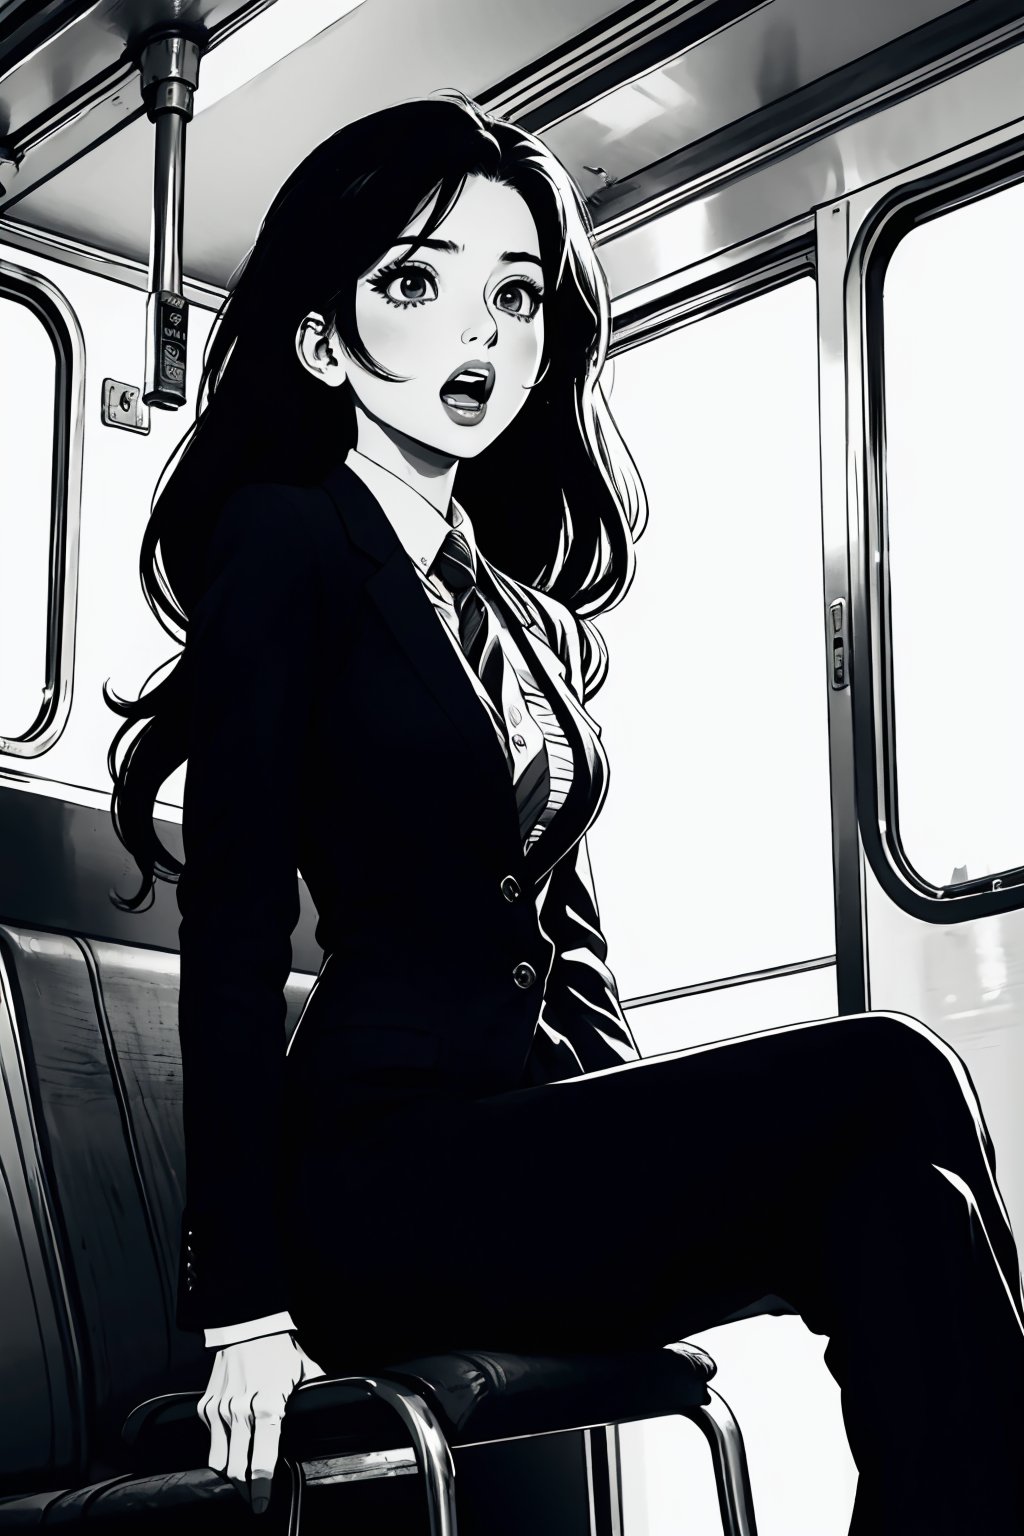 Boichi manga style, monochrome, greyscale, solo, a young lady, long hair, trouser suit, she was sitting in the train compartment, surprised eyes, open mouth, say NO, ((masterpiece))